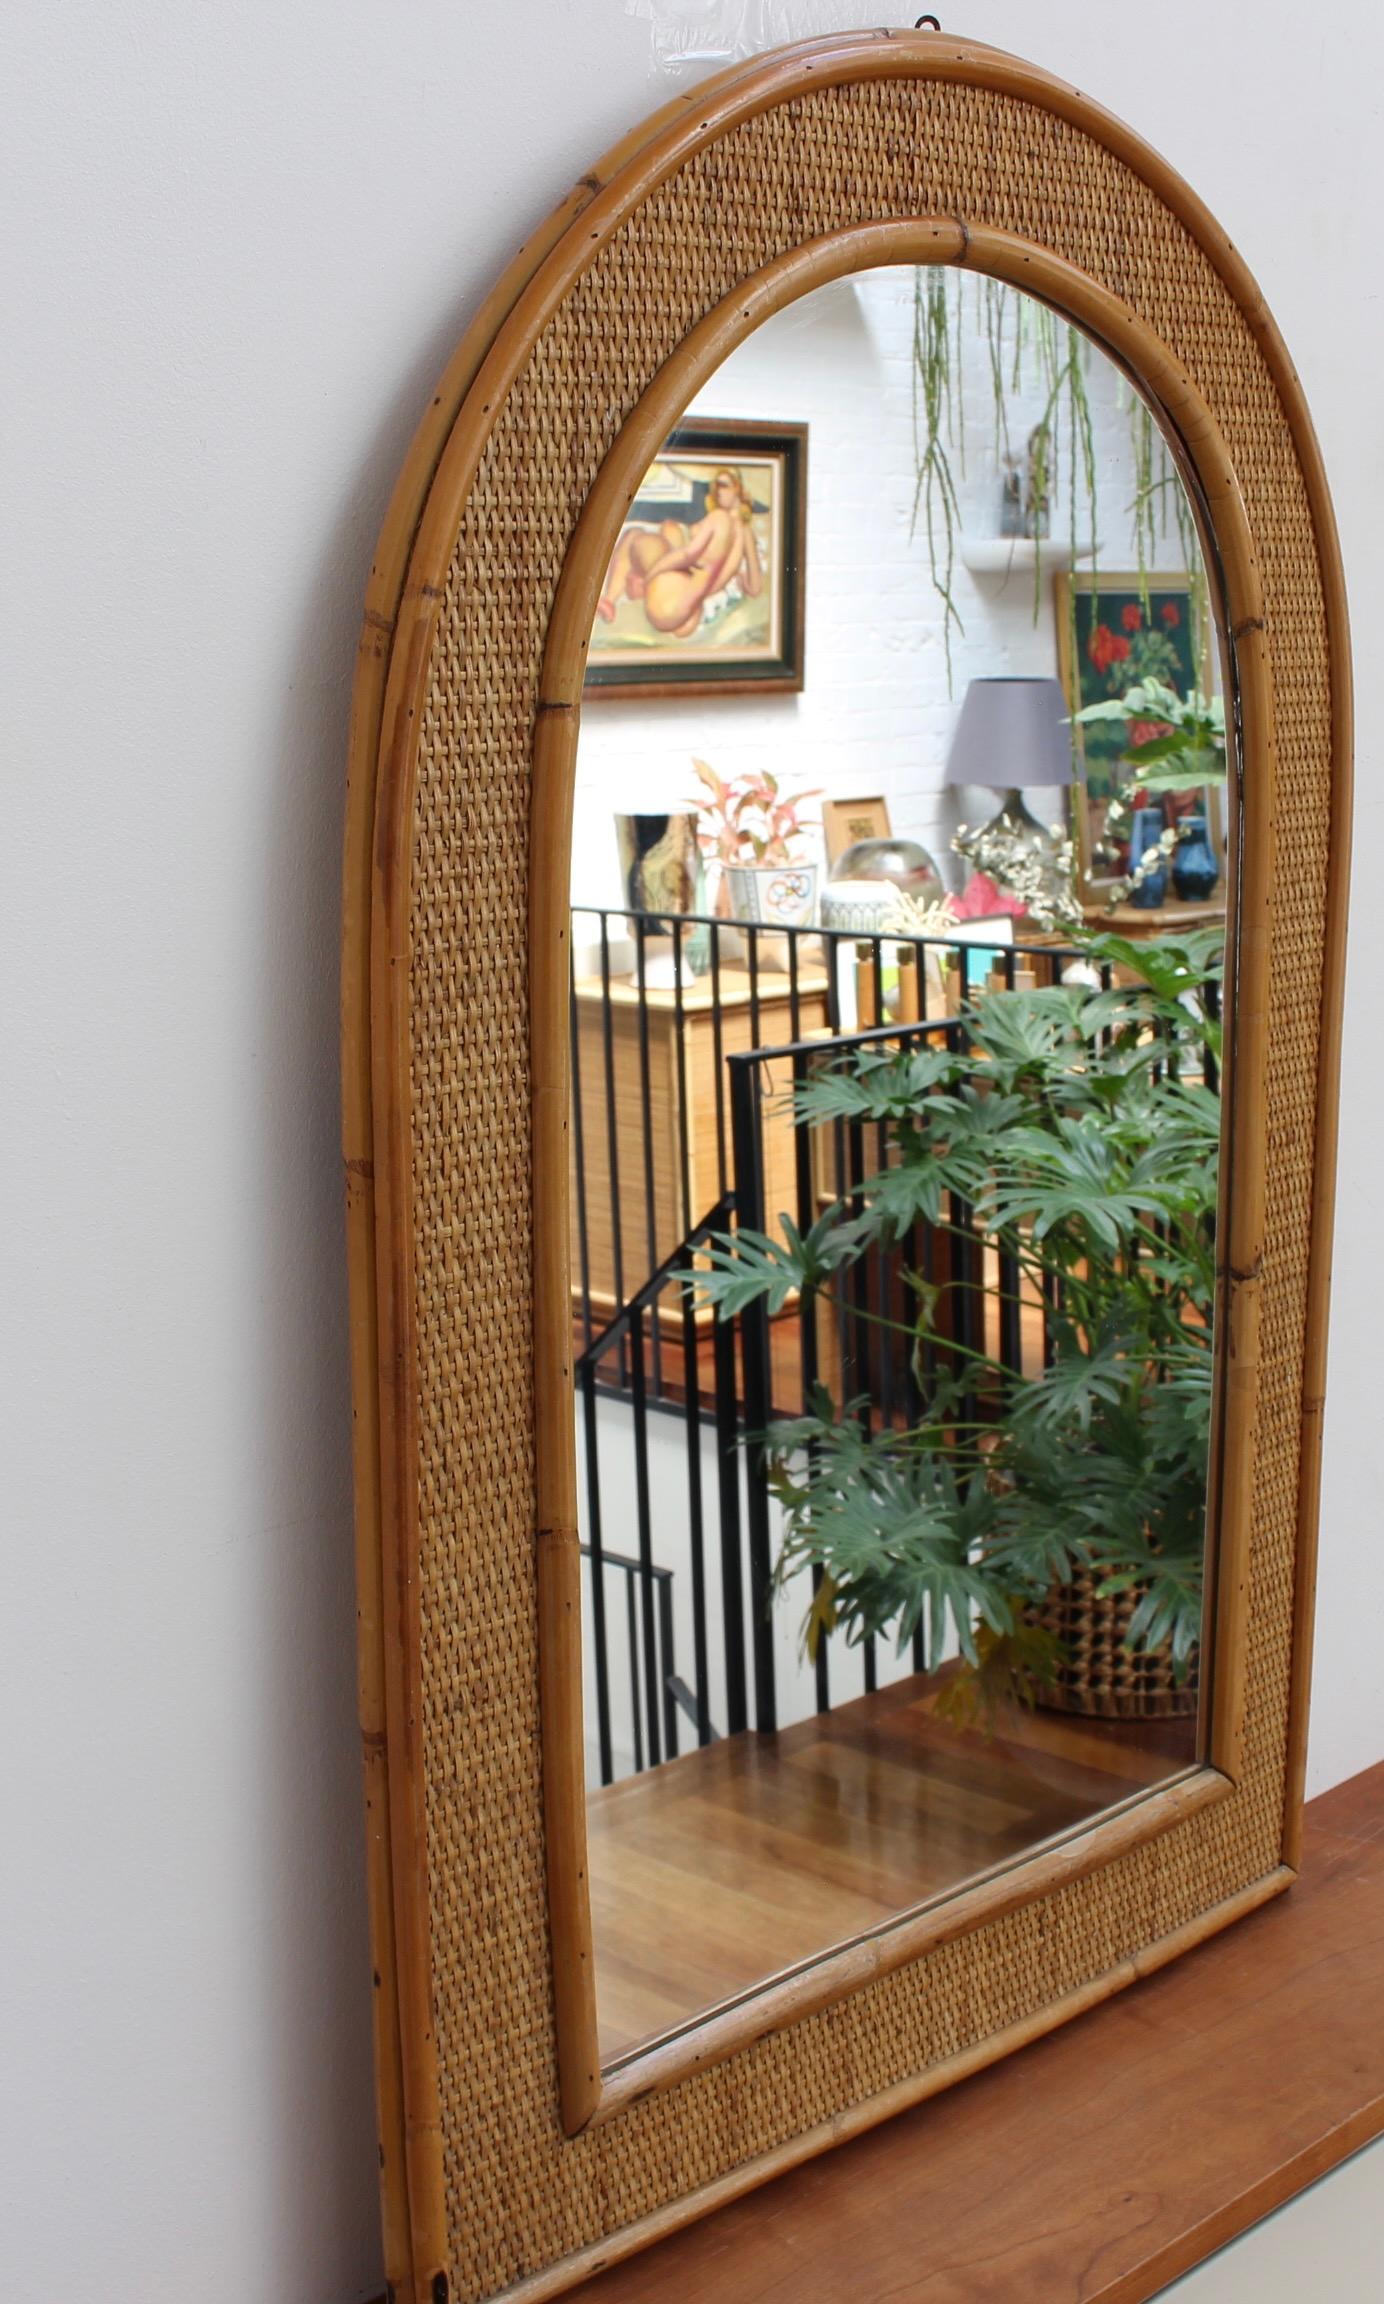 Mid-century Italian wicker and rattan wall mirror (circa 1960s). This piece has a delightful arched shape with glass enclosed by the caned frame which is itself, framed by wicker and more cane. The wicker In between the two frames adds texture and